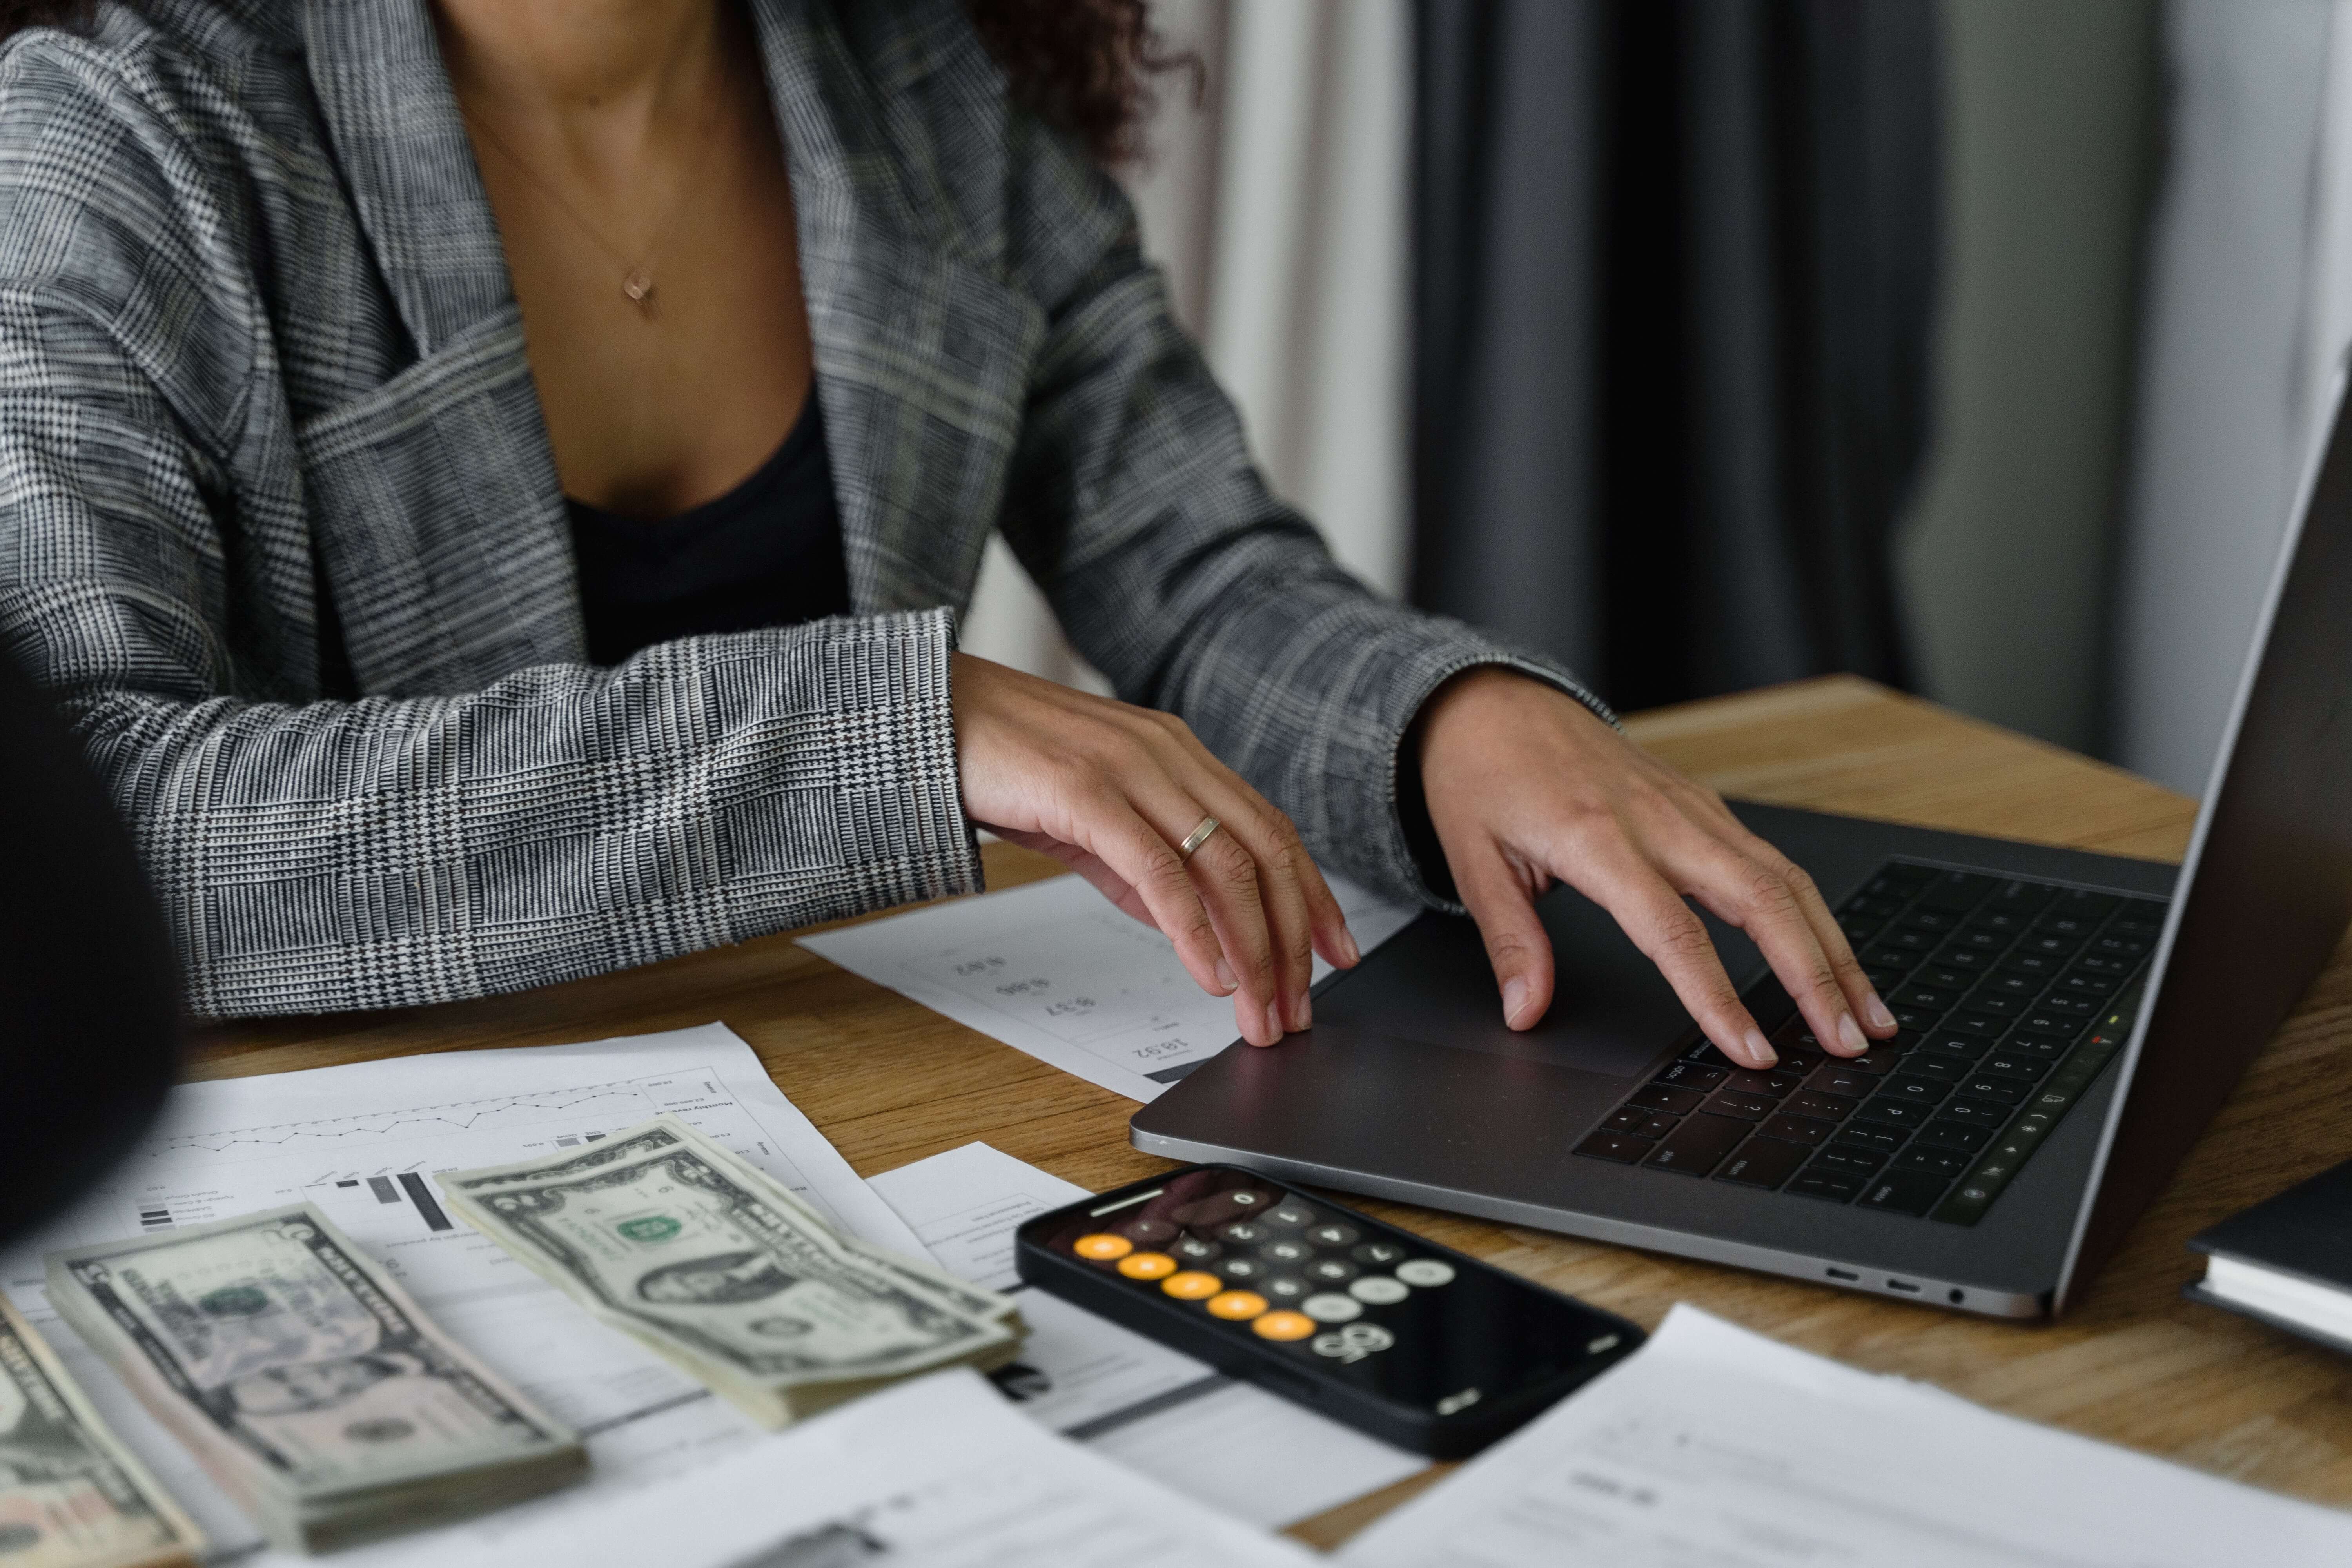 Why Women Should Stay Involved in Family Finances